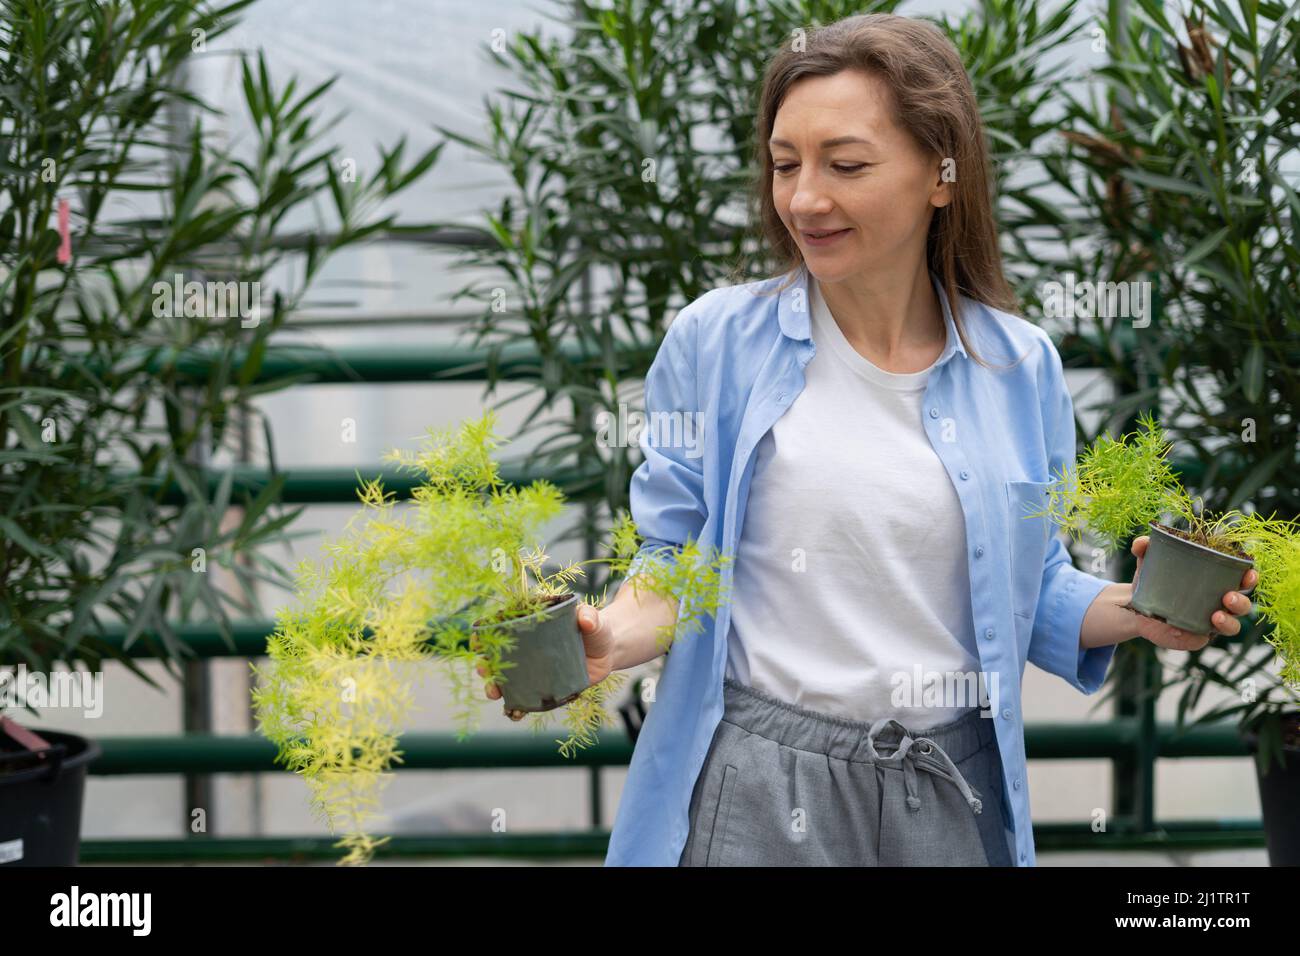 Pretty young woman buys houseplants at the garden center. A woman chooses asparagus for her home in a plant nursery. Planting season. Stock Photo